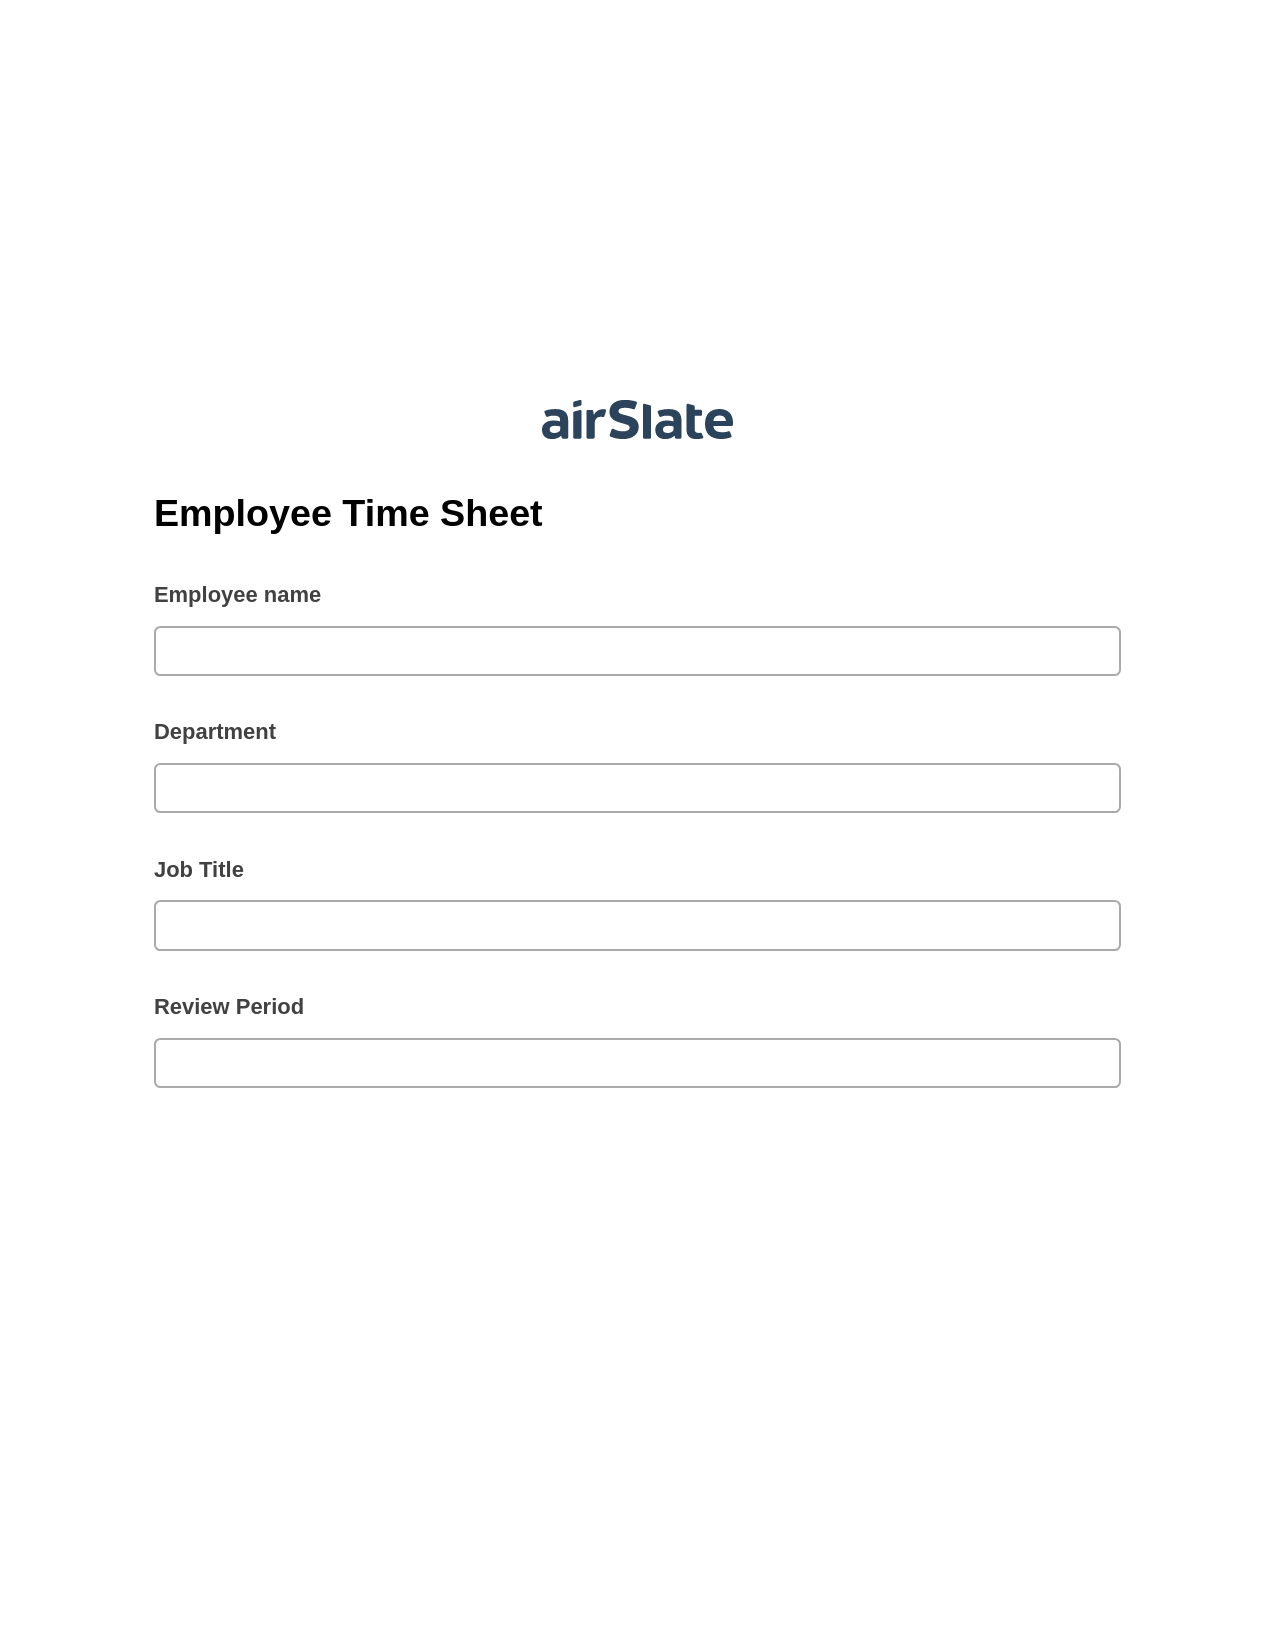 Employee Time Sheet Pre-fill from MS Dynamics 365 Records, Create Salesforce Records Bot, Slack Notification Postfinish Bot